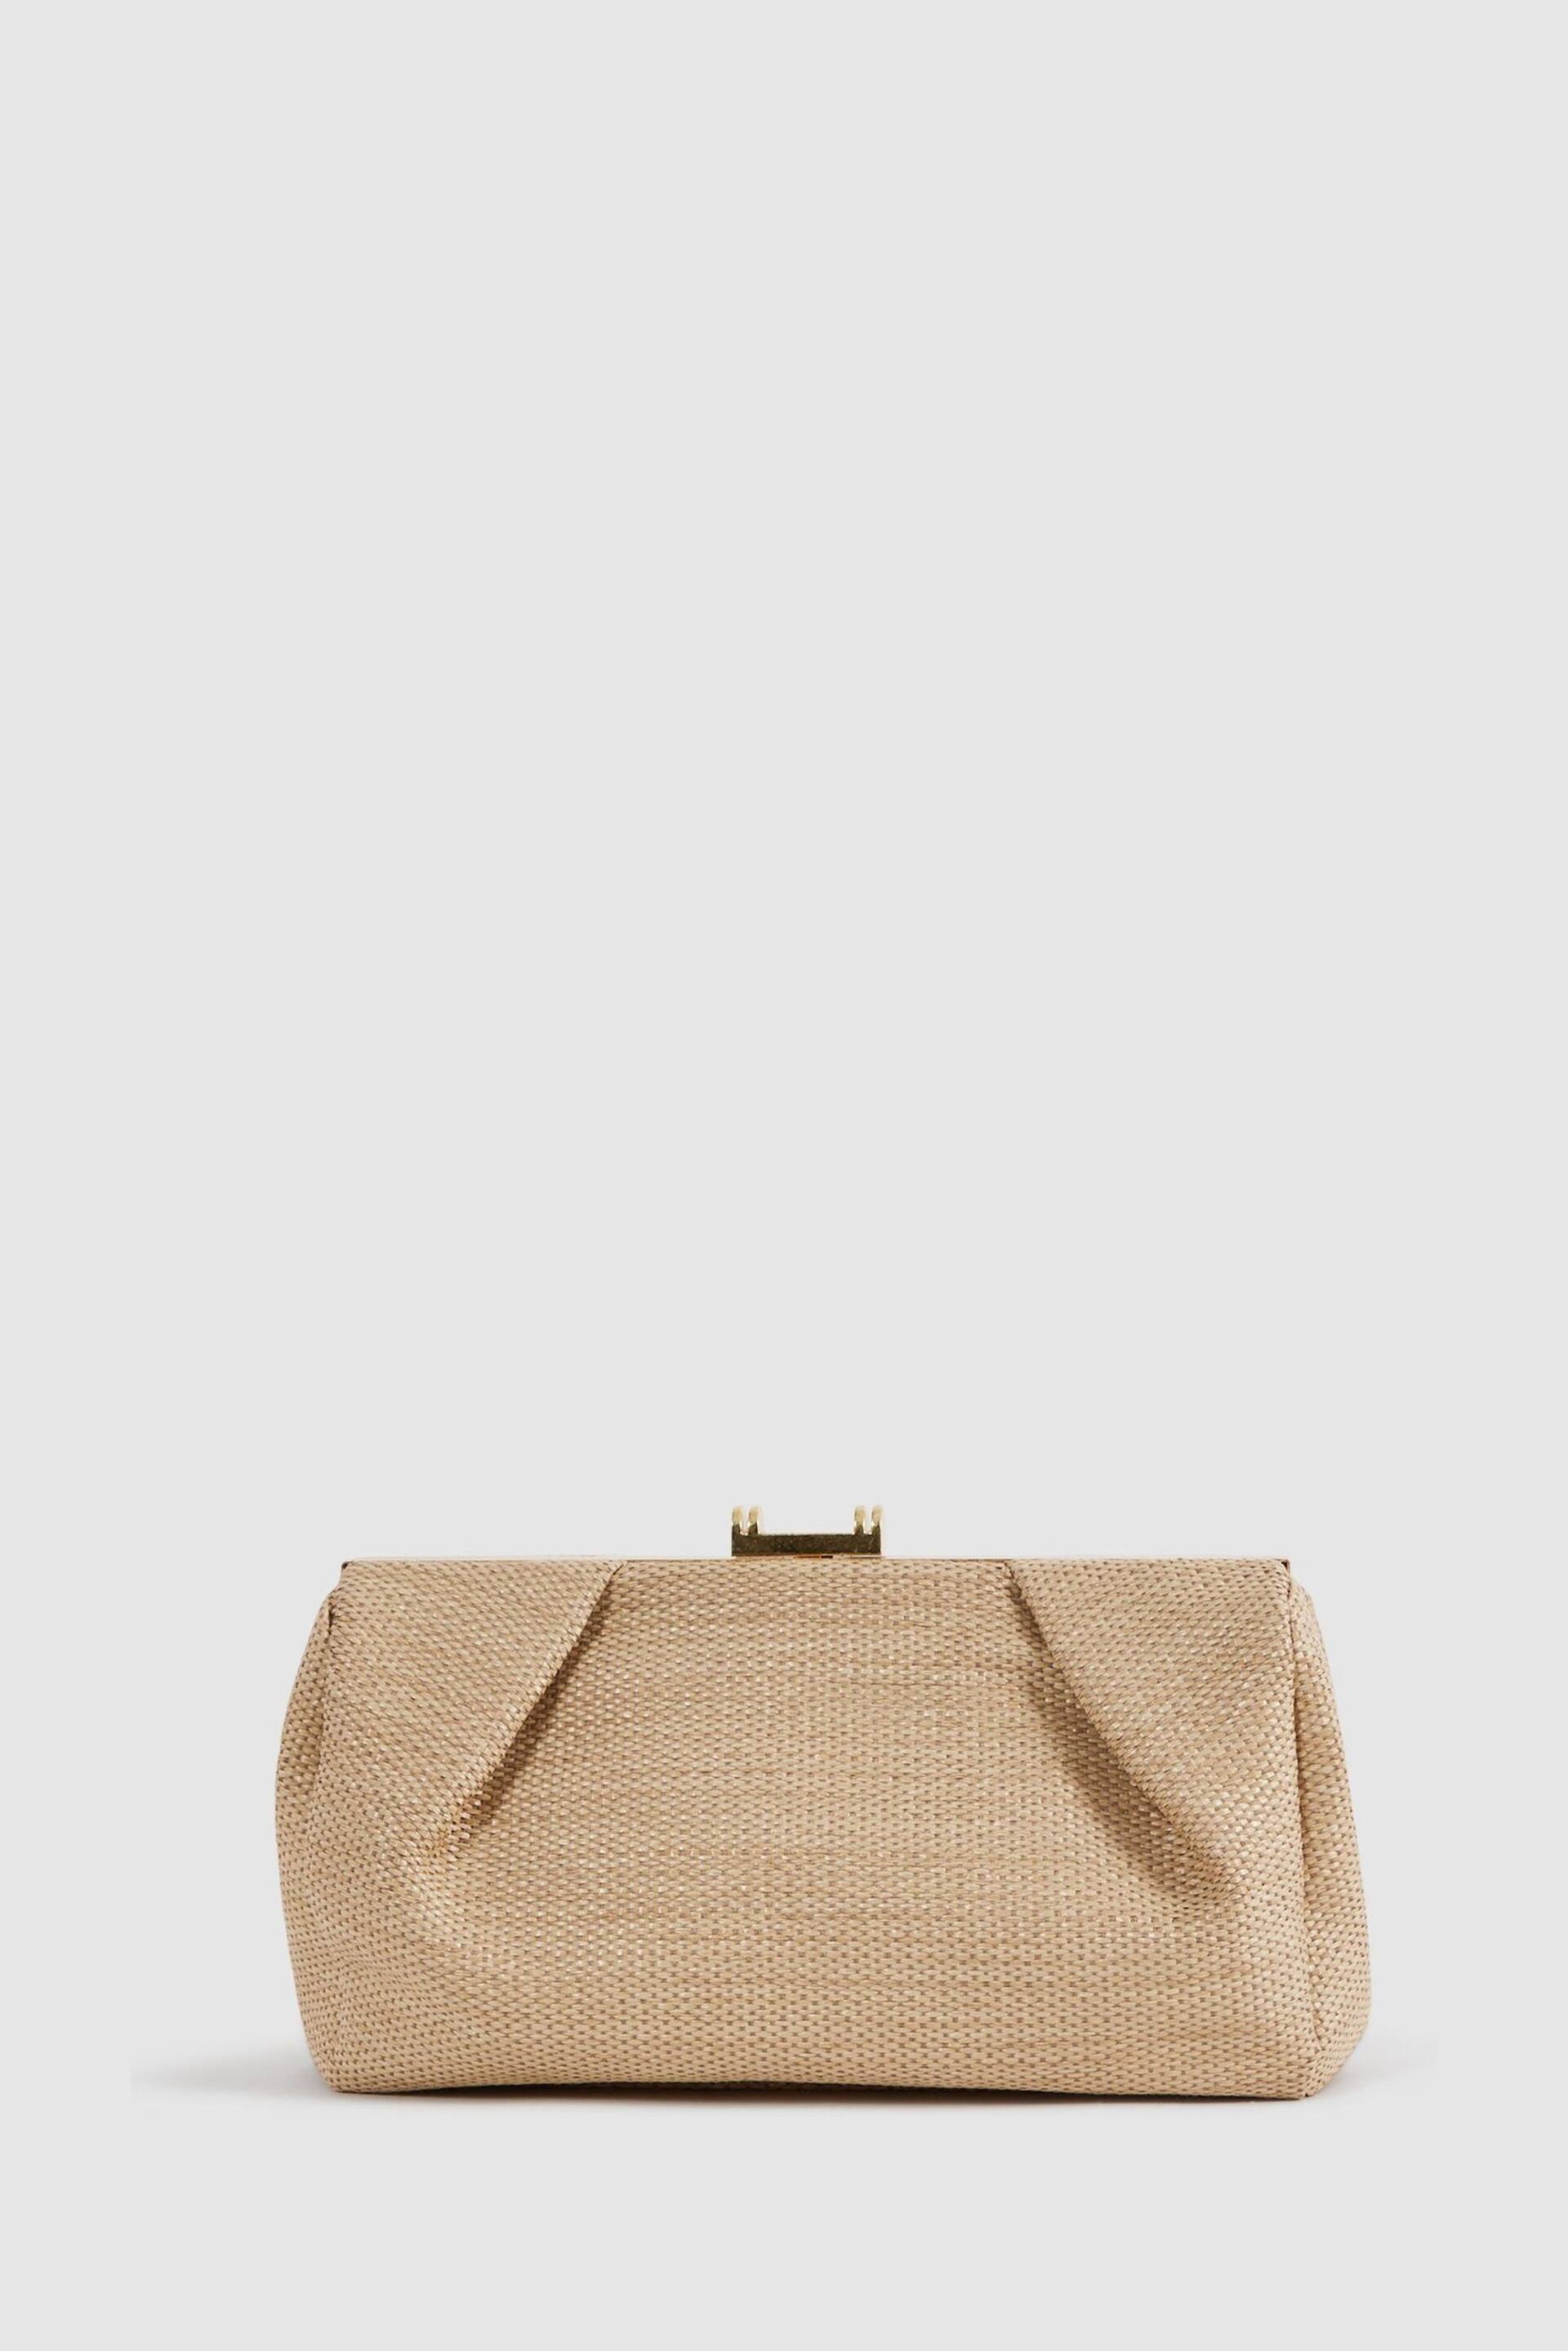 Reiss Natural Madison Woven Clutch Bag - Image 3 of 5